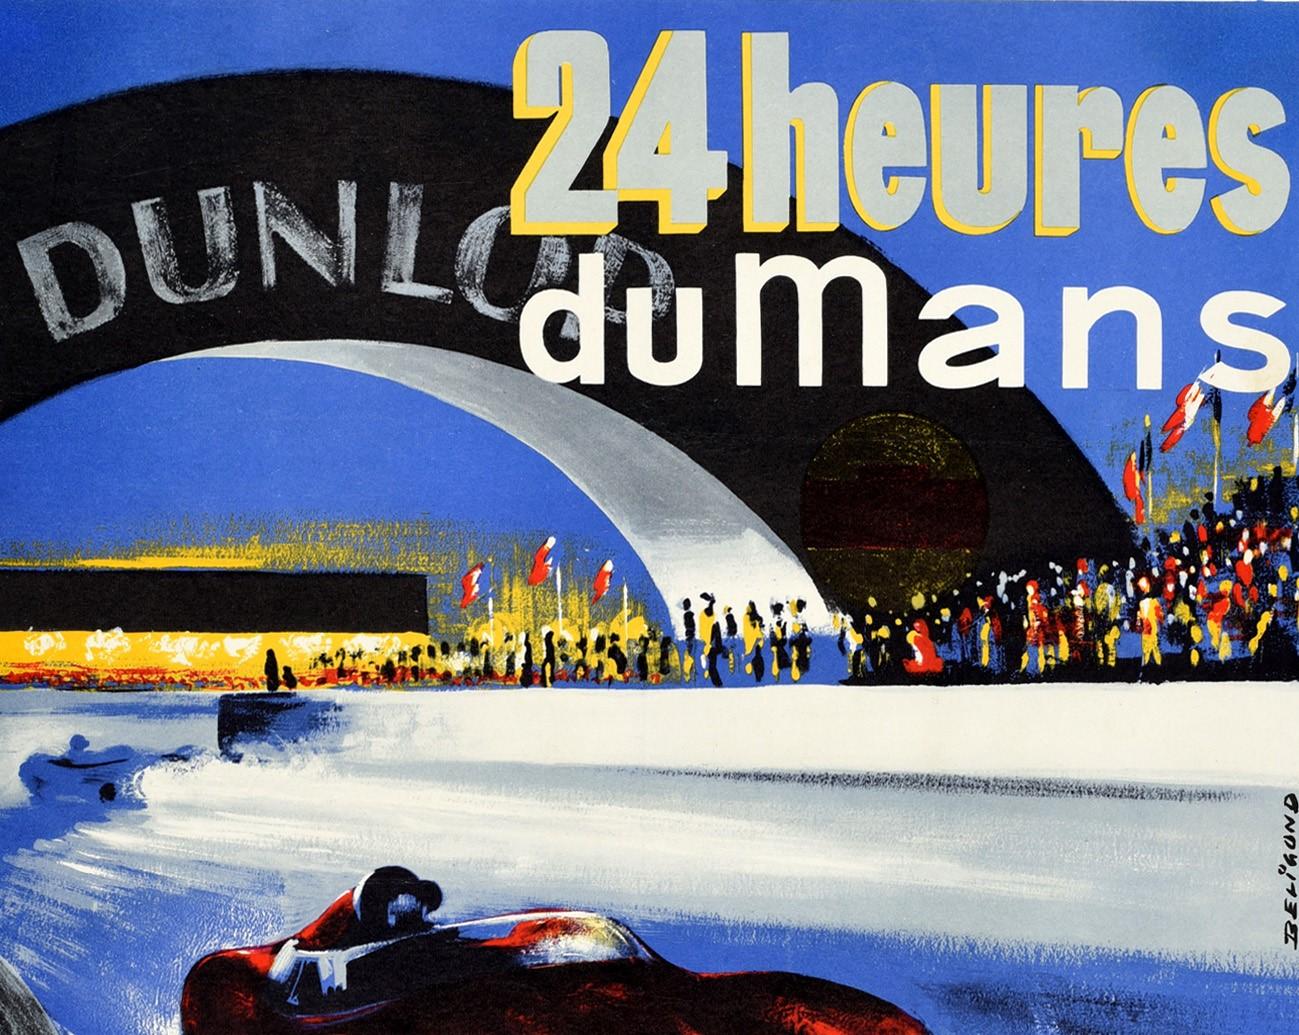 Original vintage motor sport poster for the 24 Heures du Mans on 21 and 22 June 1958. Great artwork by Michel Beligond (1927-1973) of a red number 24 race car driving at speed on the race track towards the viewer with its headlights on, another